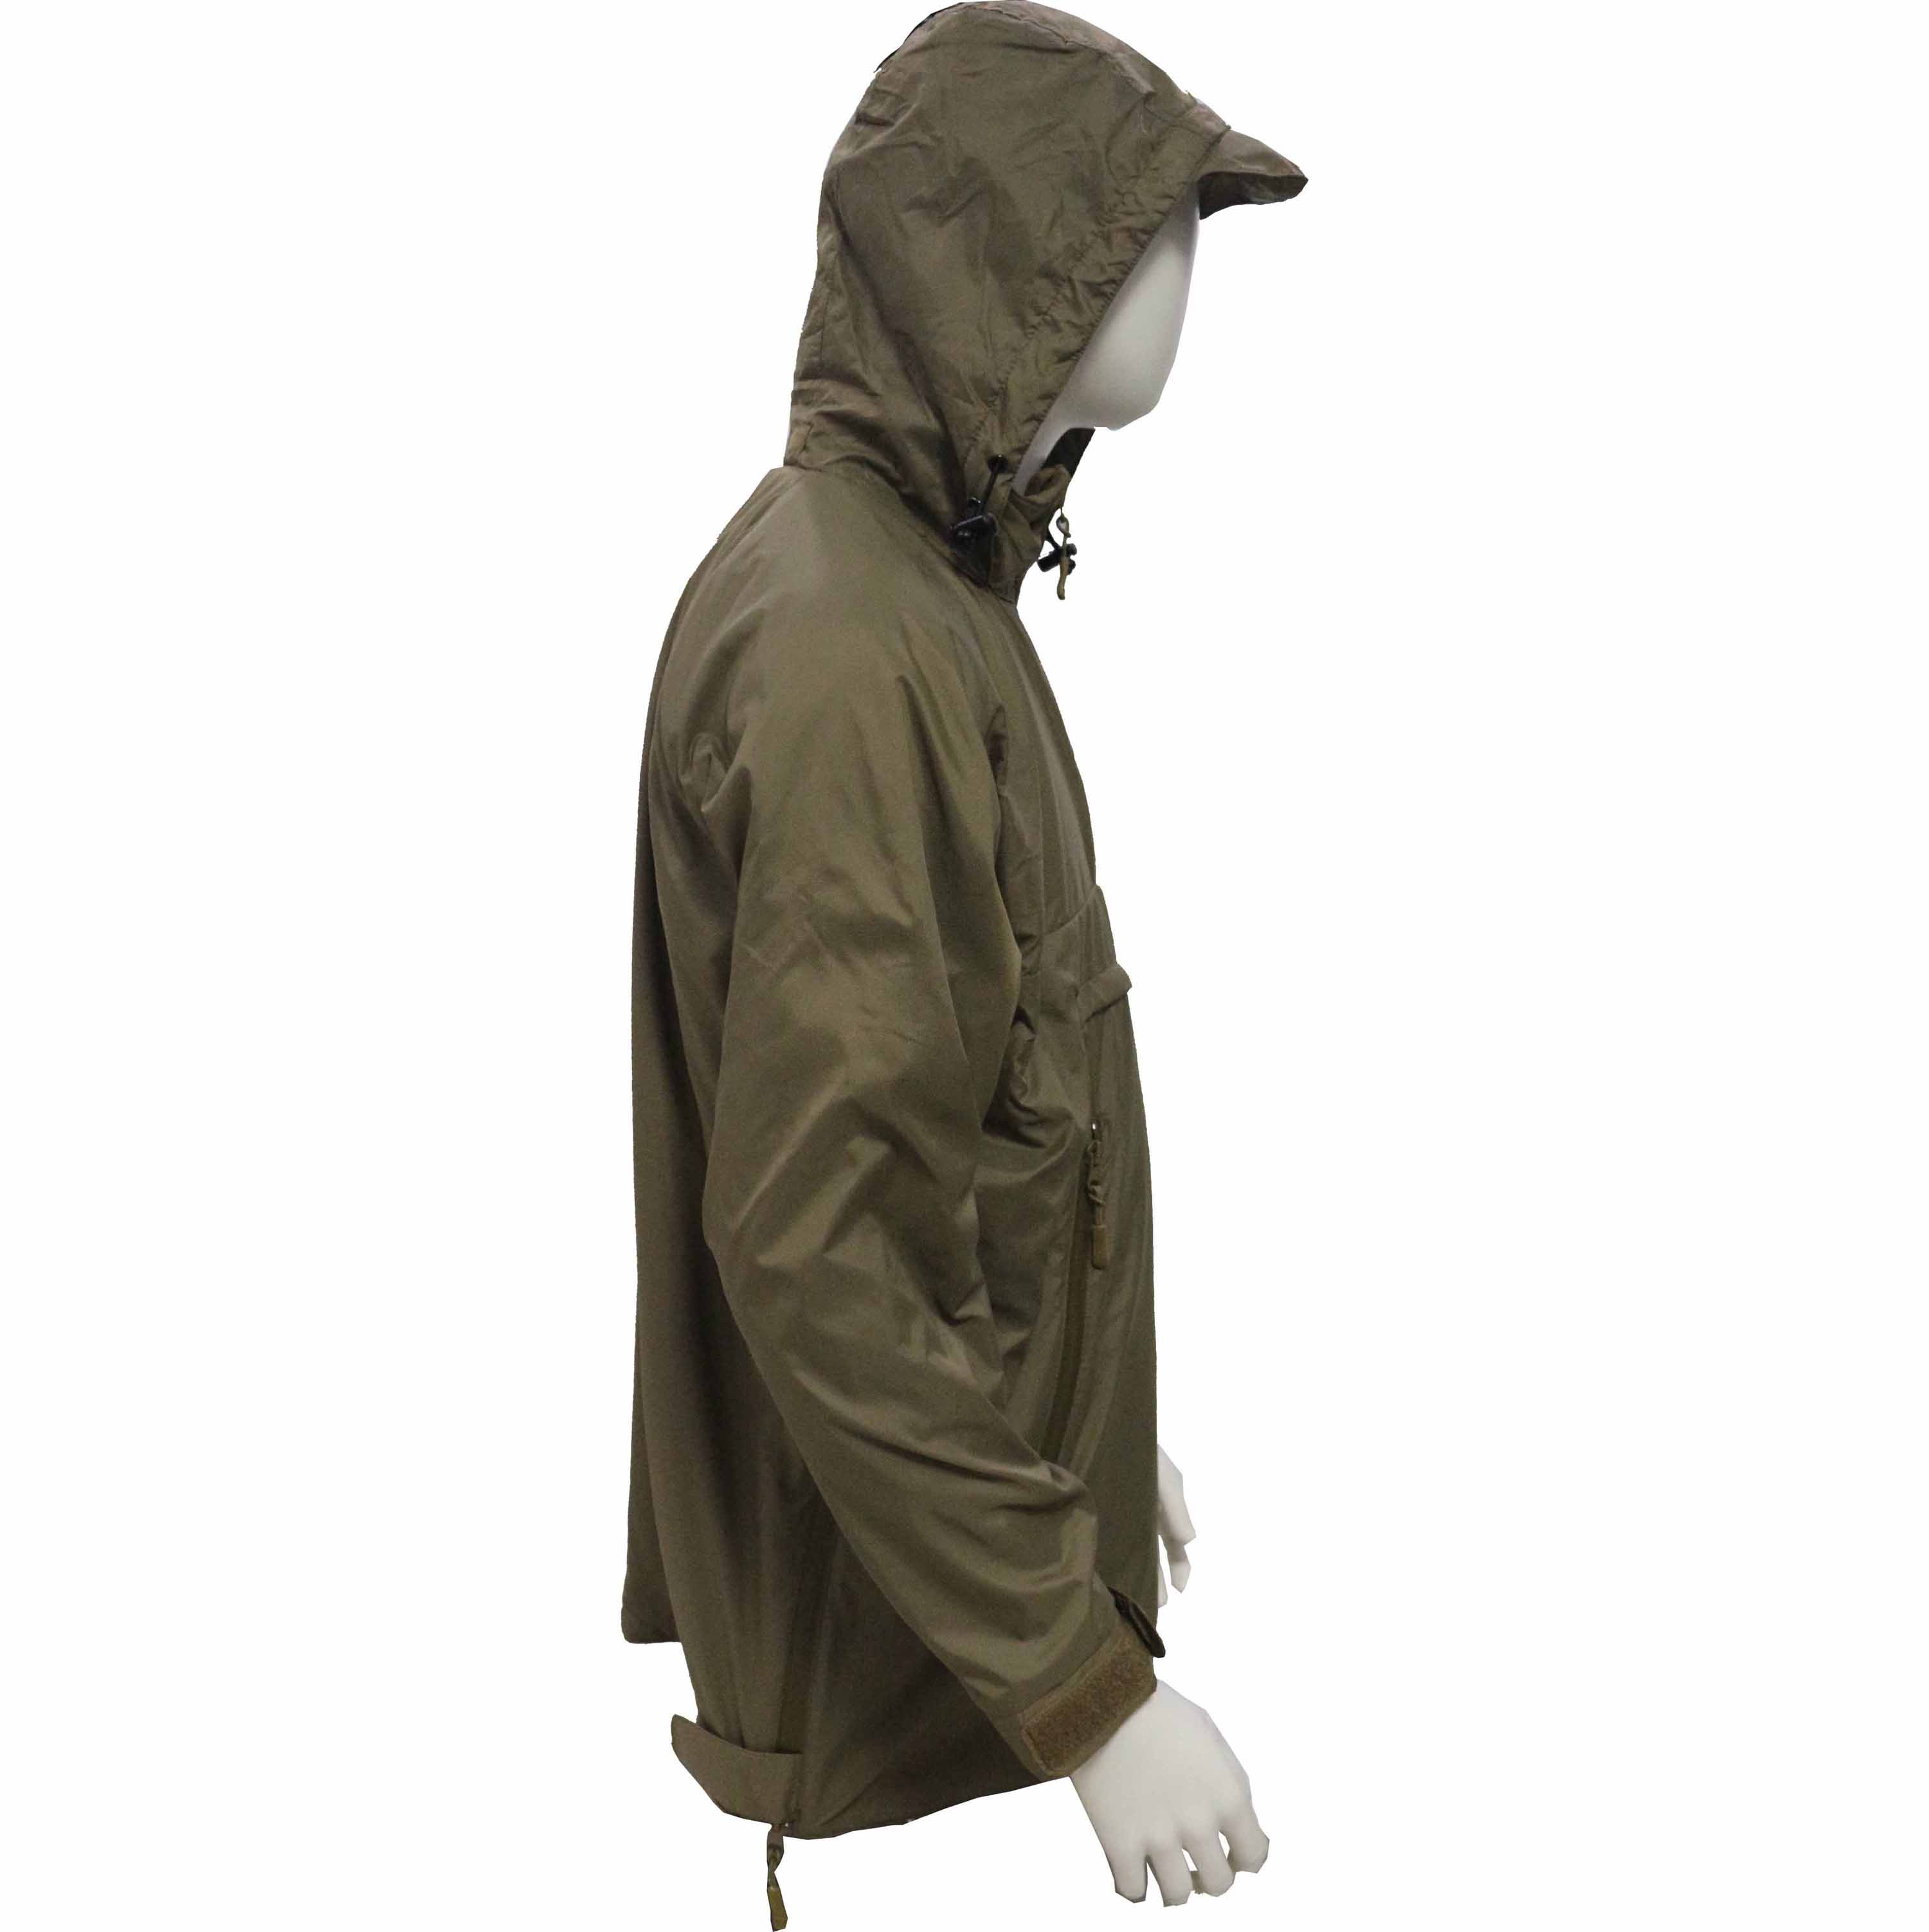 Tactical Military Cold Weather Jacket with Fleece Jacket Inside